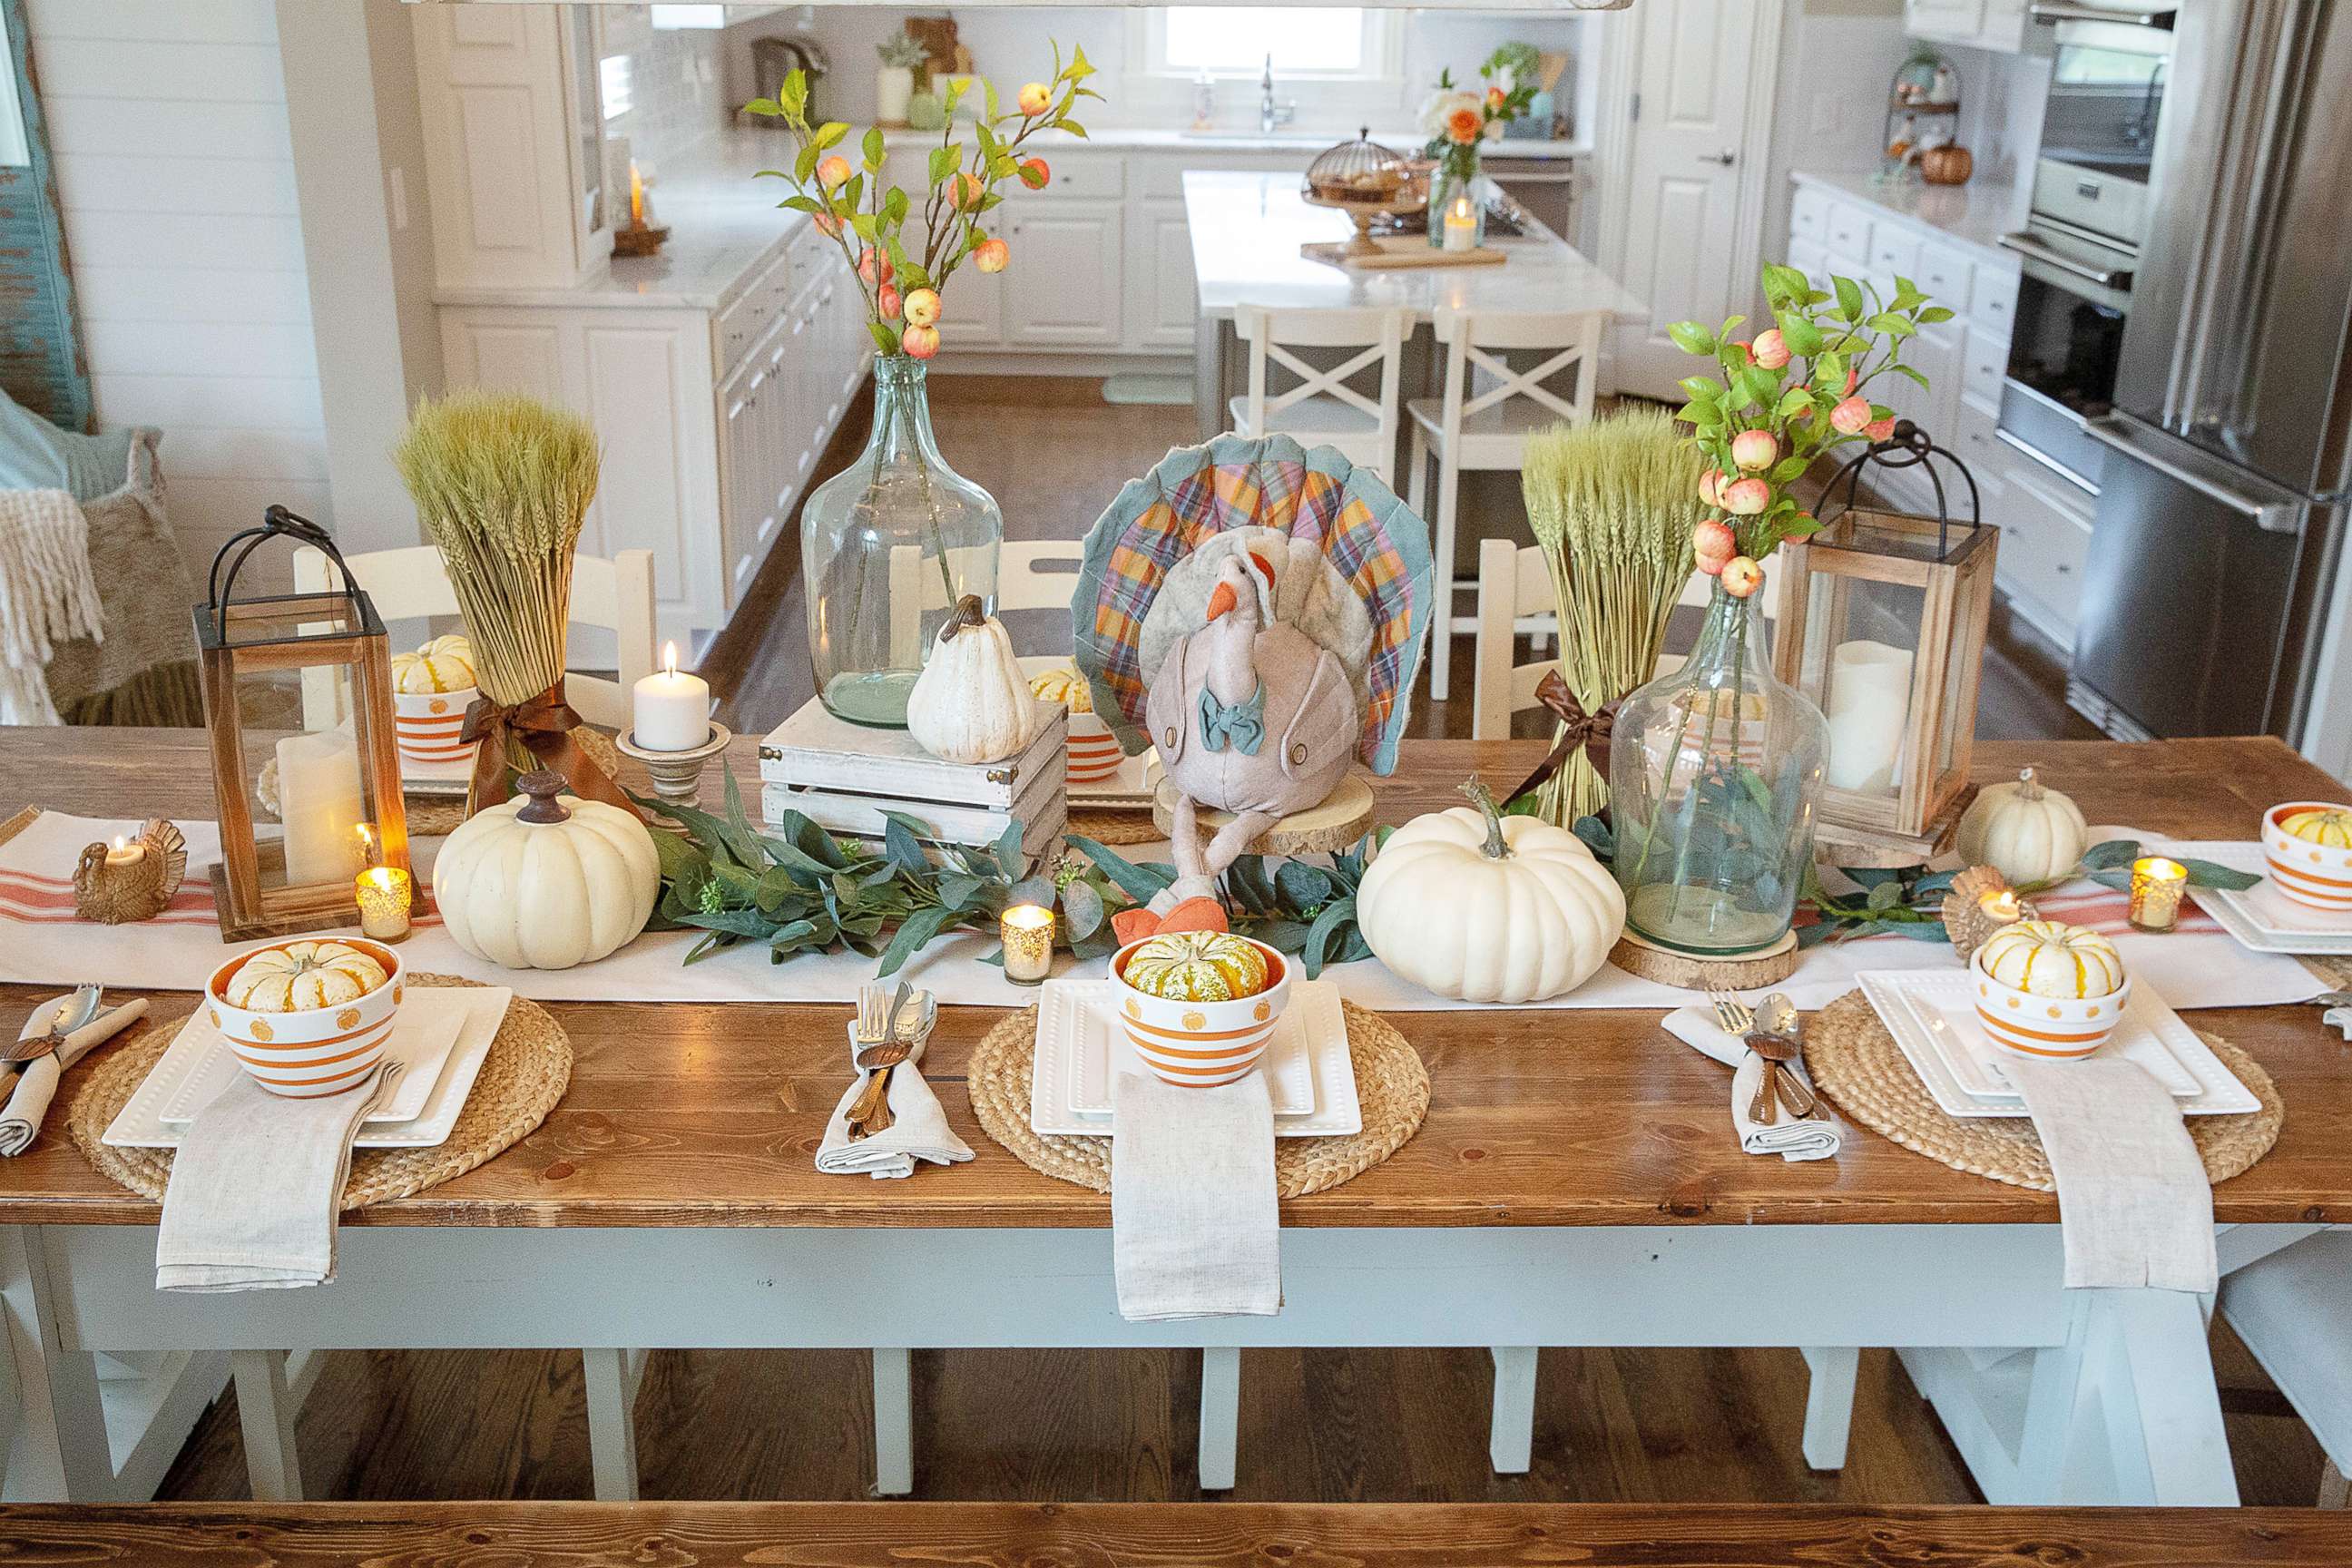 PHOTO: Layer your table with various sizes and shapes and don't forget to add some turkeys for a festive touch!